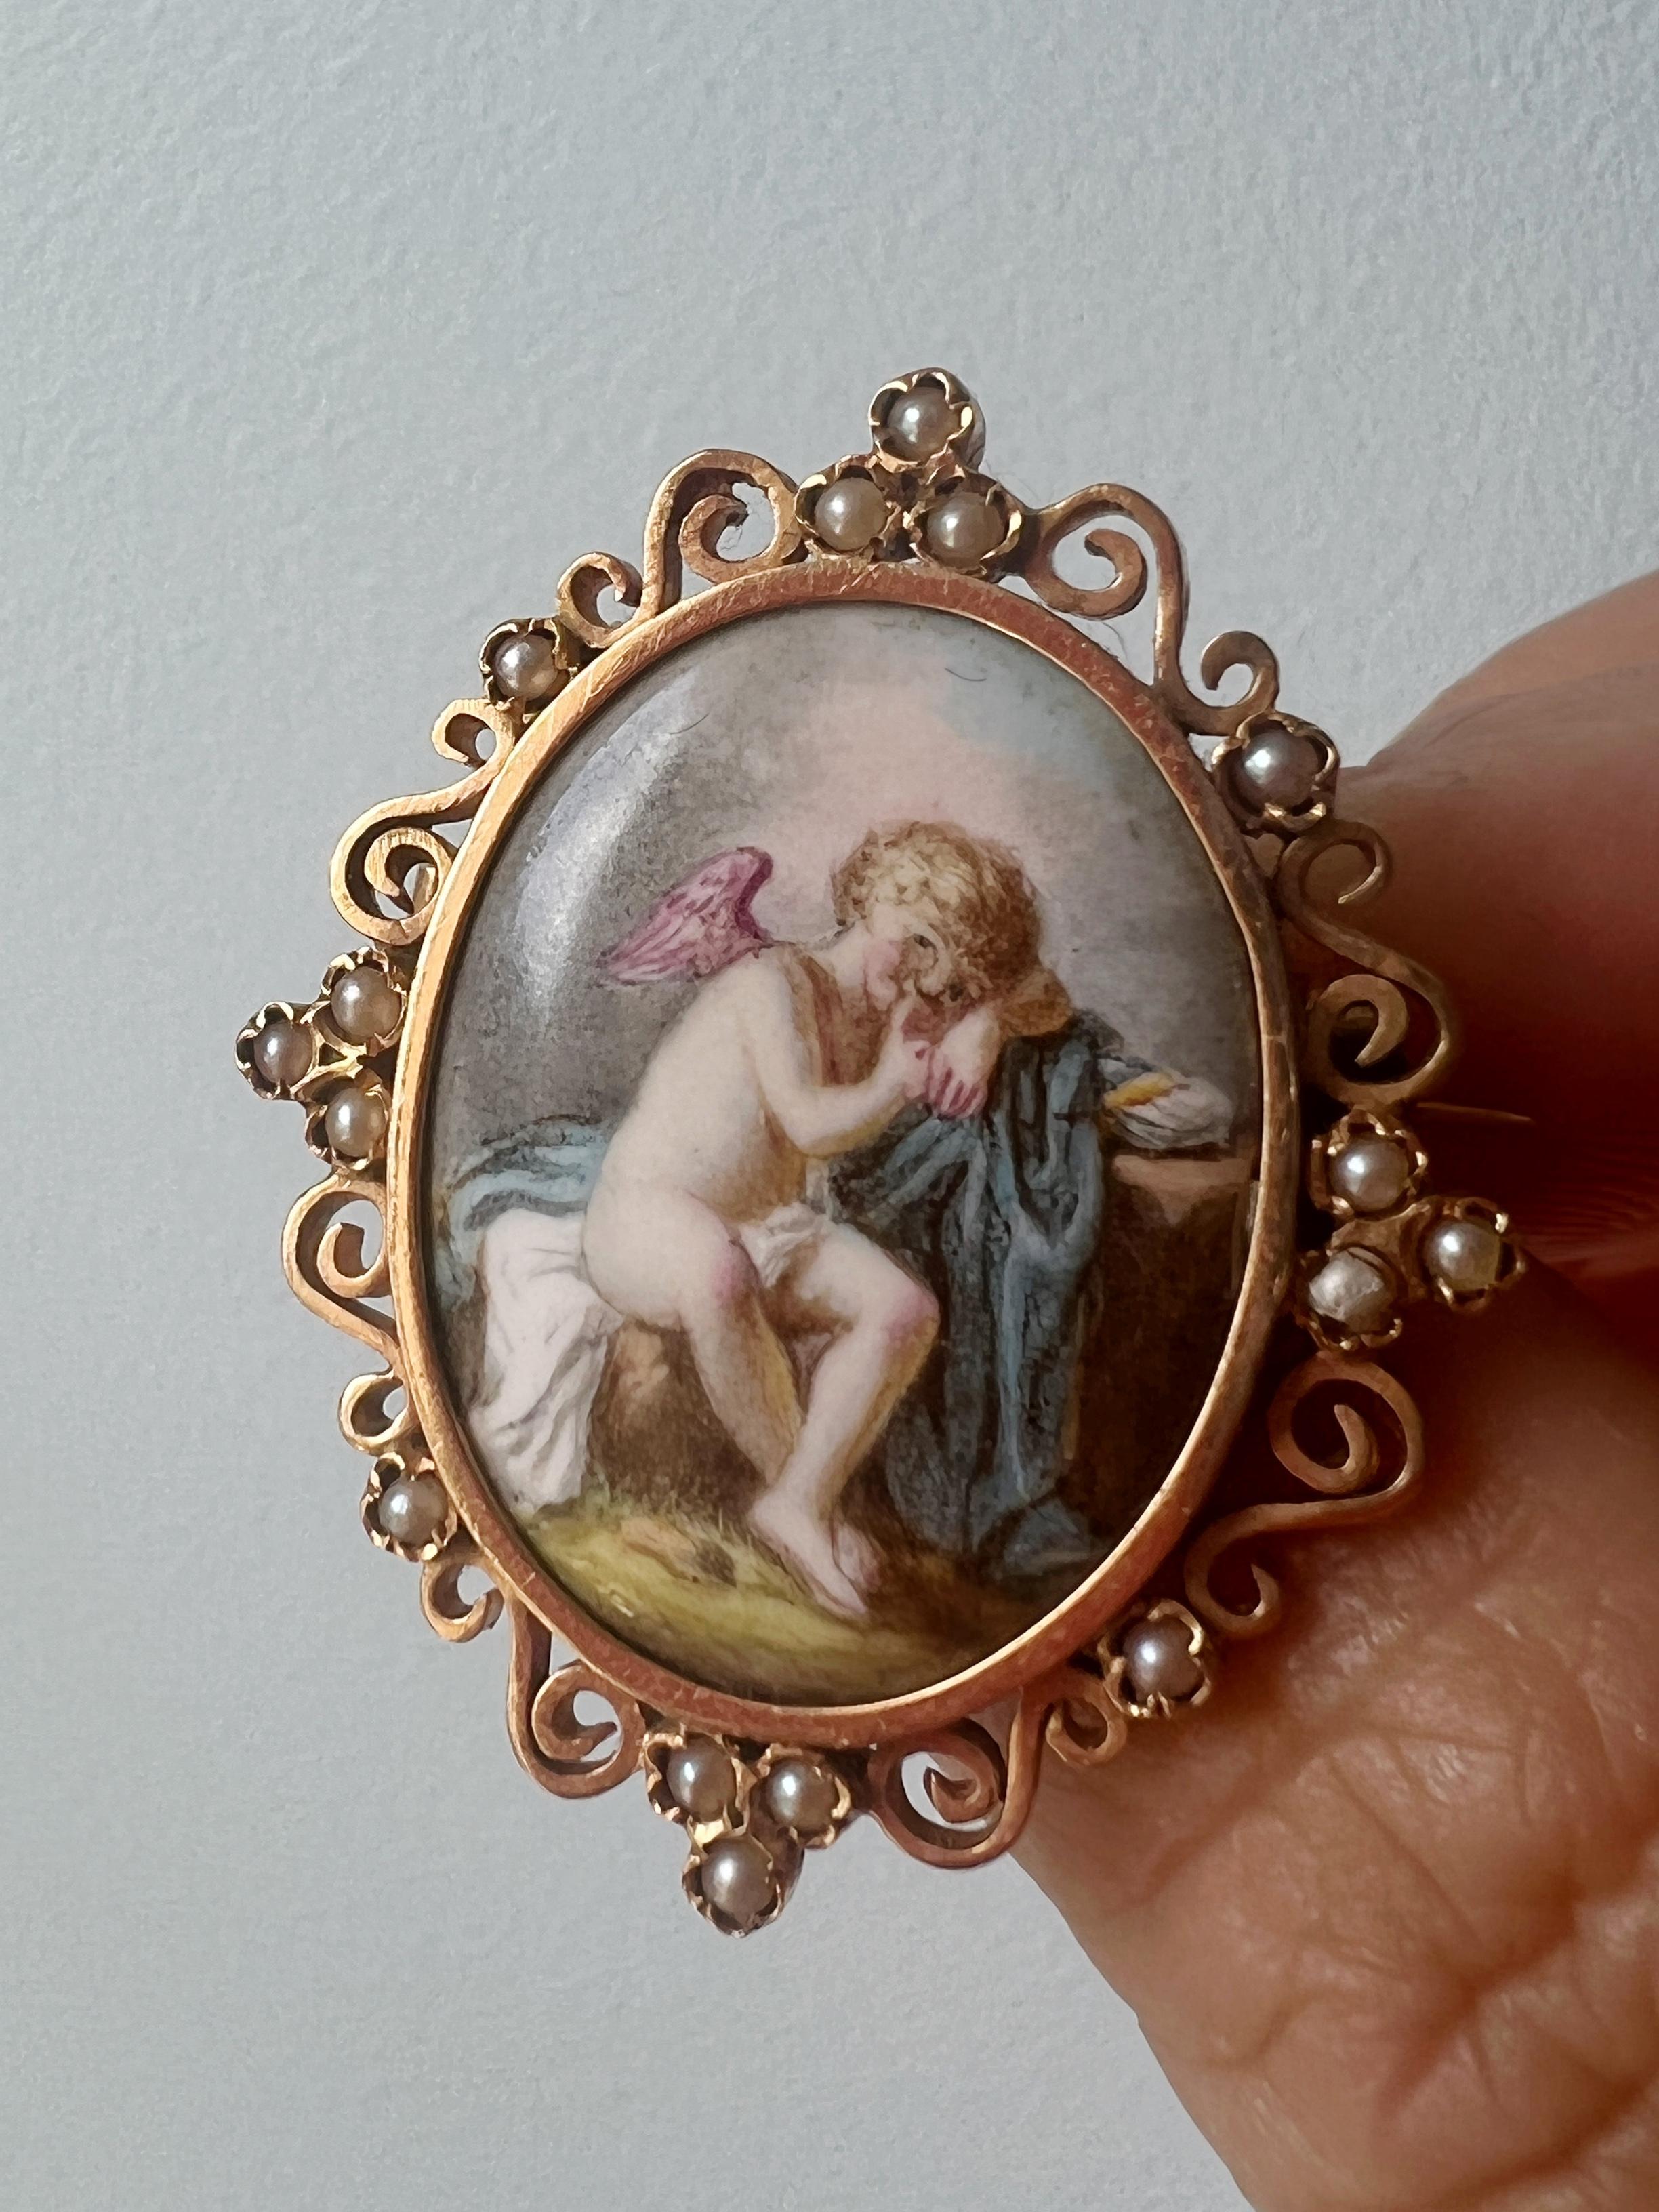 Some of the most endearing antique jewelry of every era feature little winged beings. Angels, or cherubs, embody sacred love, and may be understood as guardians. On the other hand, enameled jewelry is among the most researched jewelry items in the